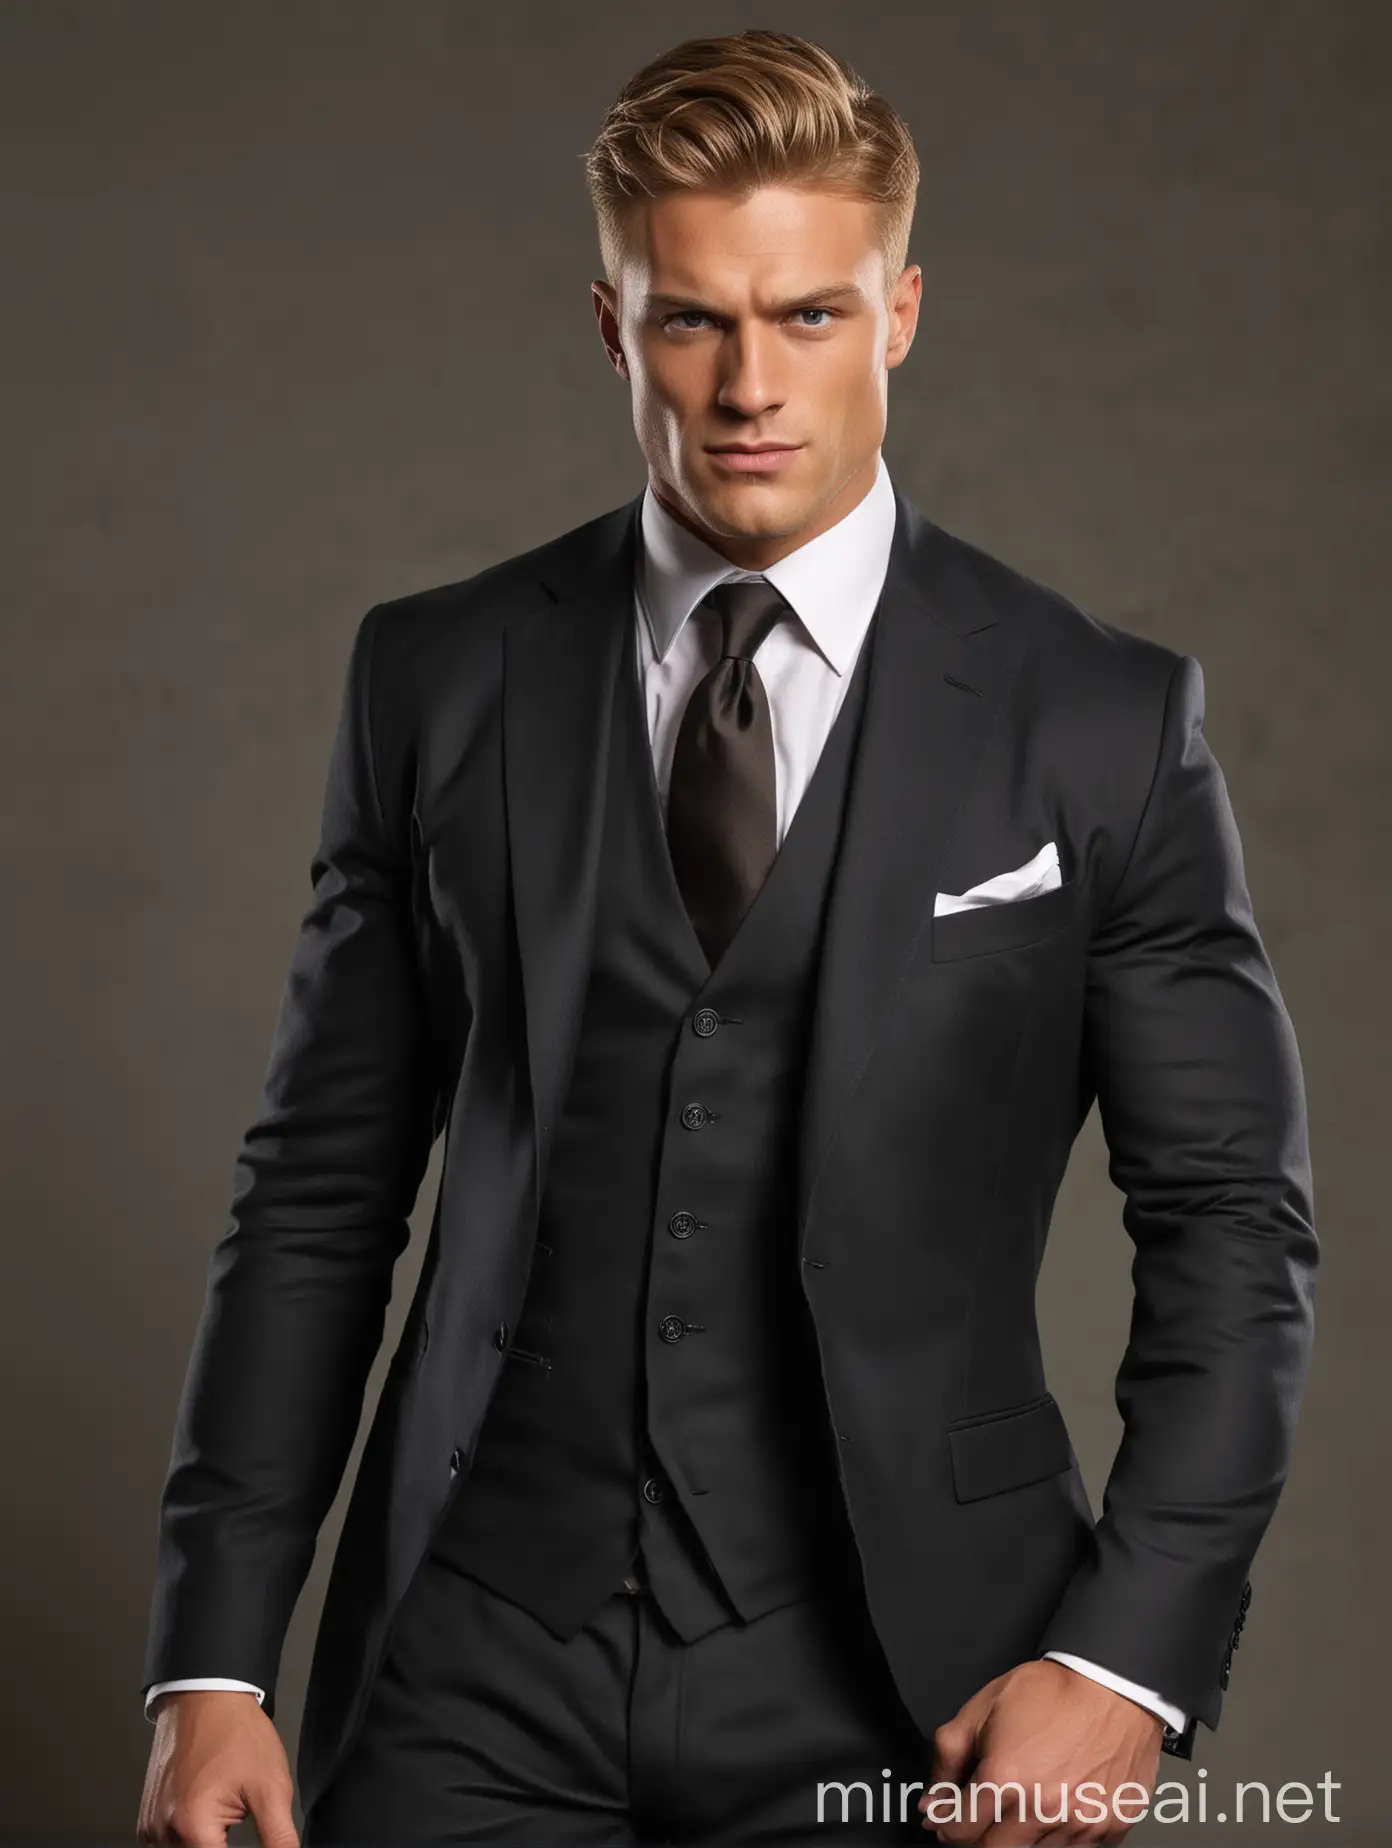 Roguish White Male Model in Tailored Black Suit and Gray Tie